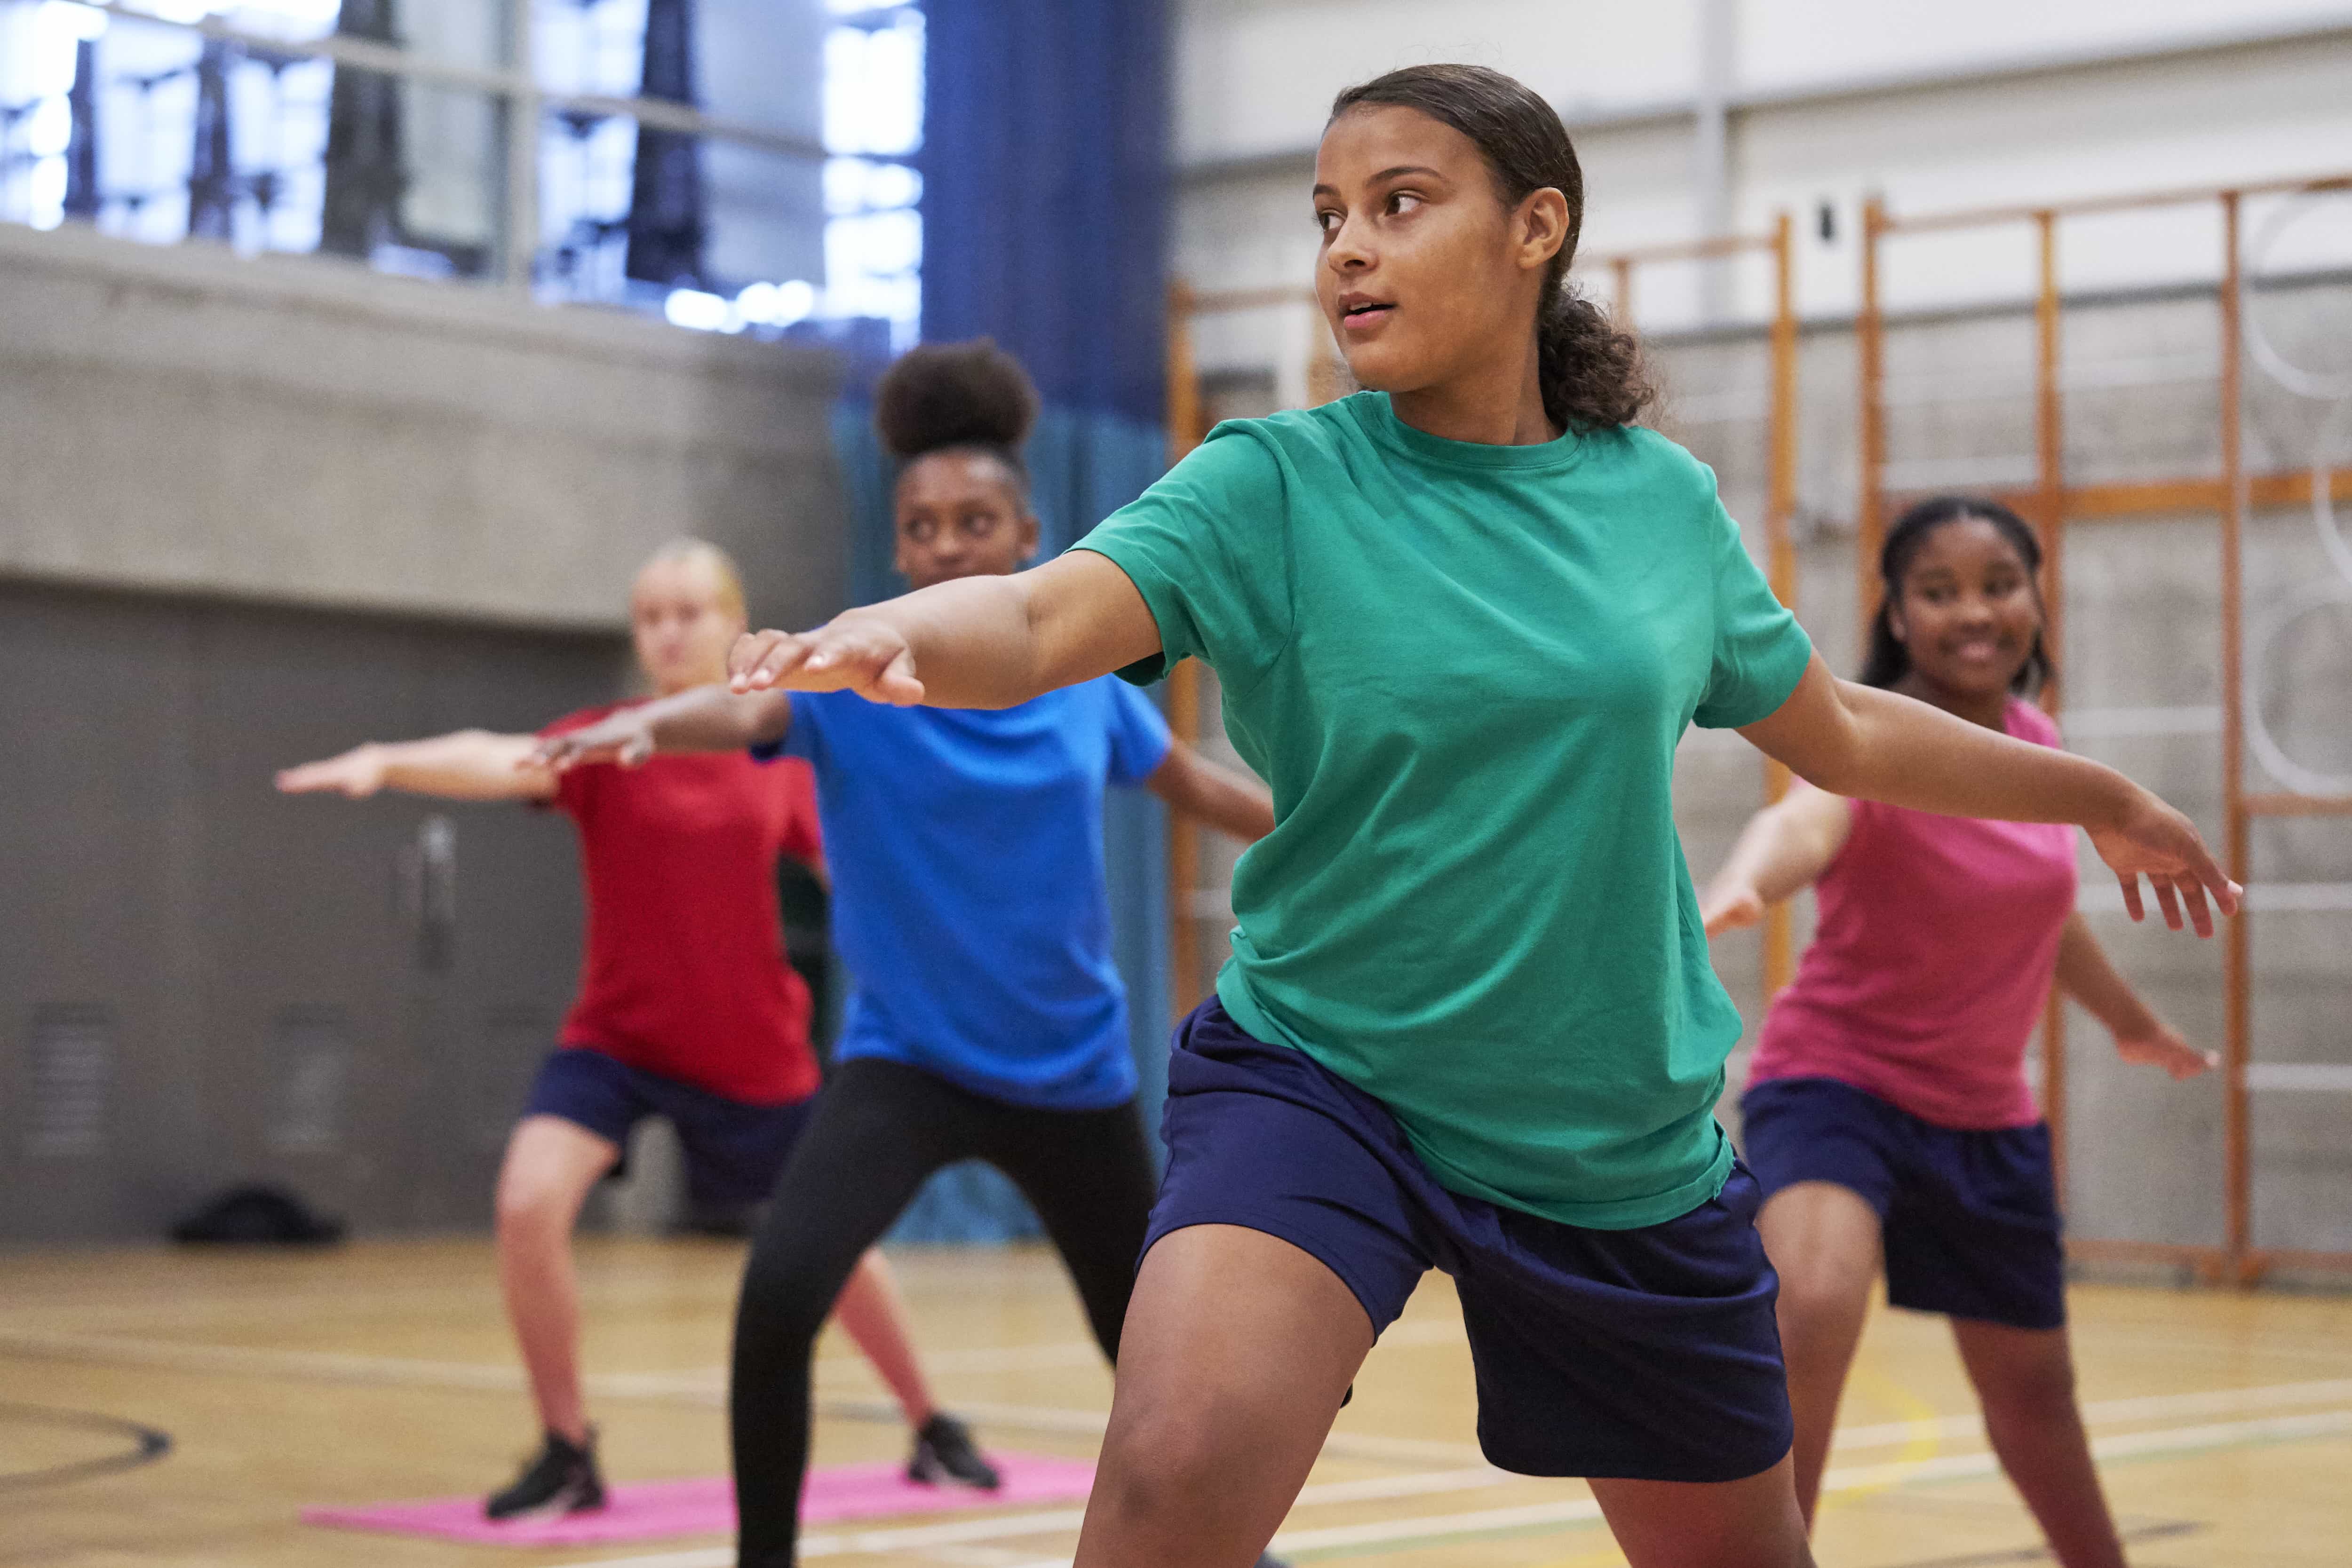 Young people wearing bright coloured t-shirts are taking part in a fitness class in a school sports hall 